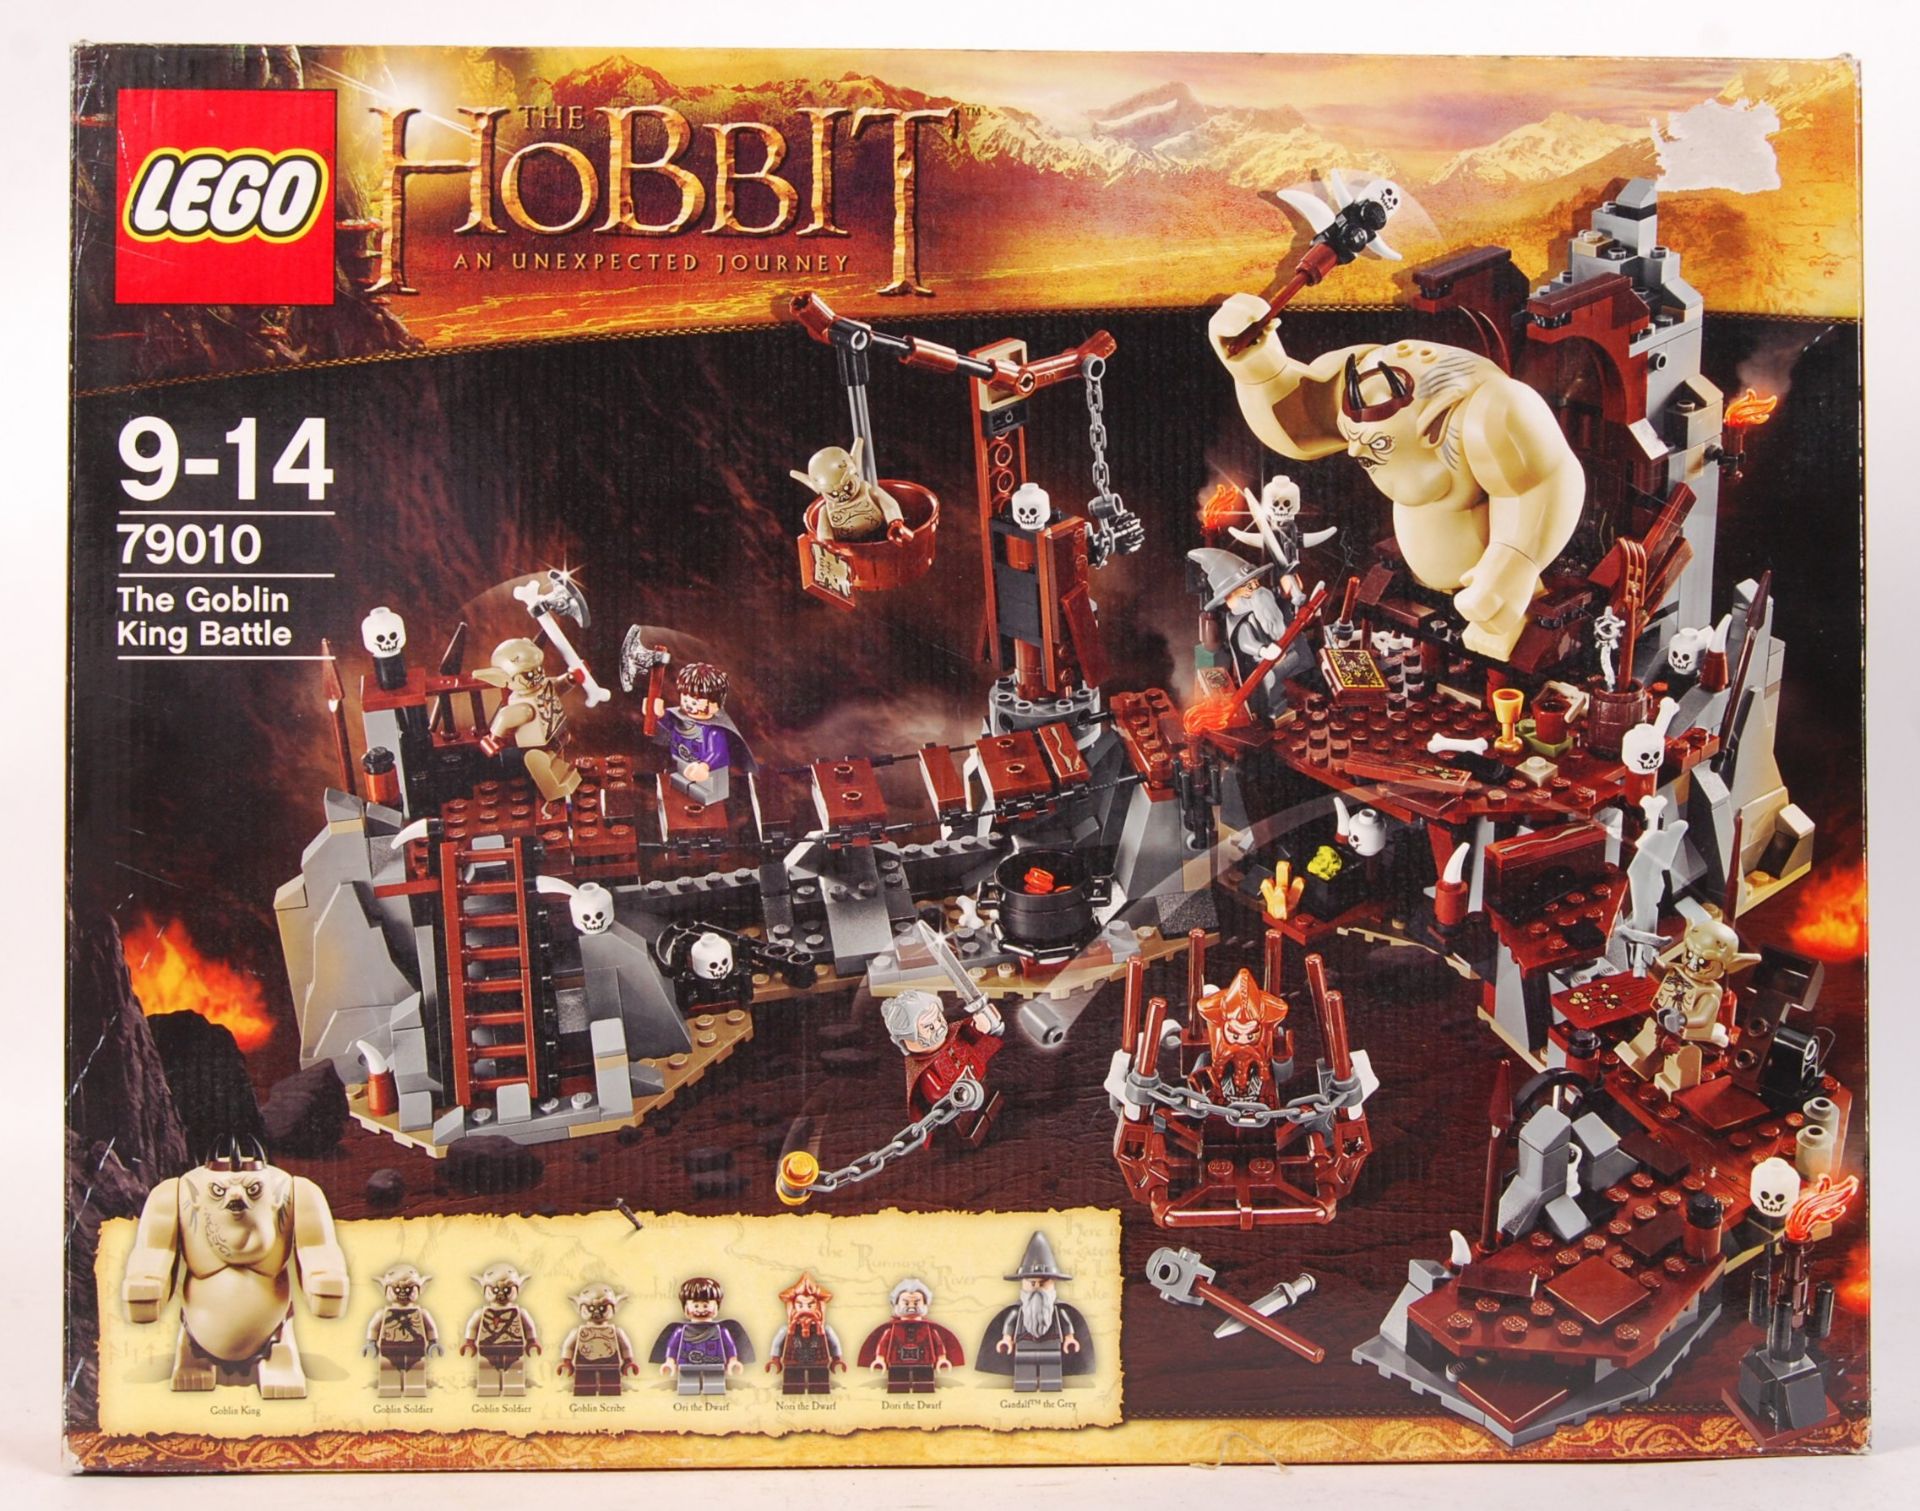 LEGO THE HOBBIT AN UNEXPECTED JOURNEY BOXED SET